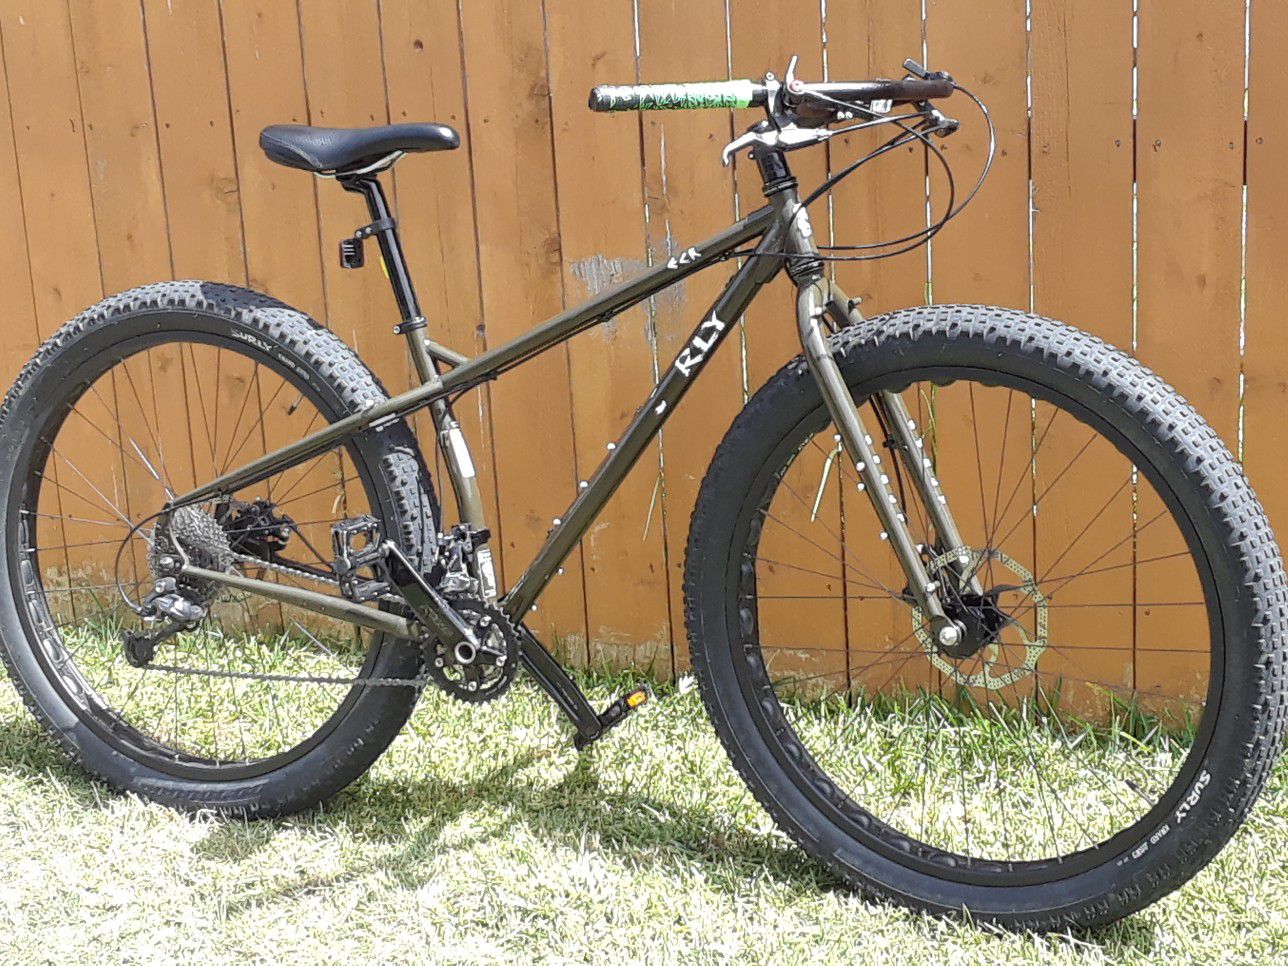 29" ecr surly bike - (Yes it's available )